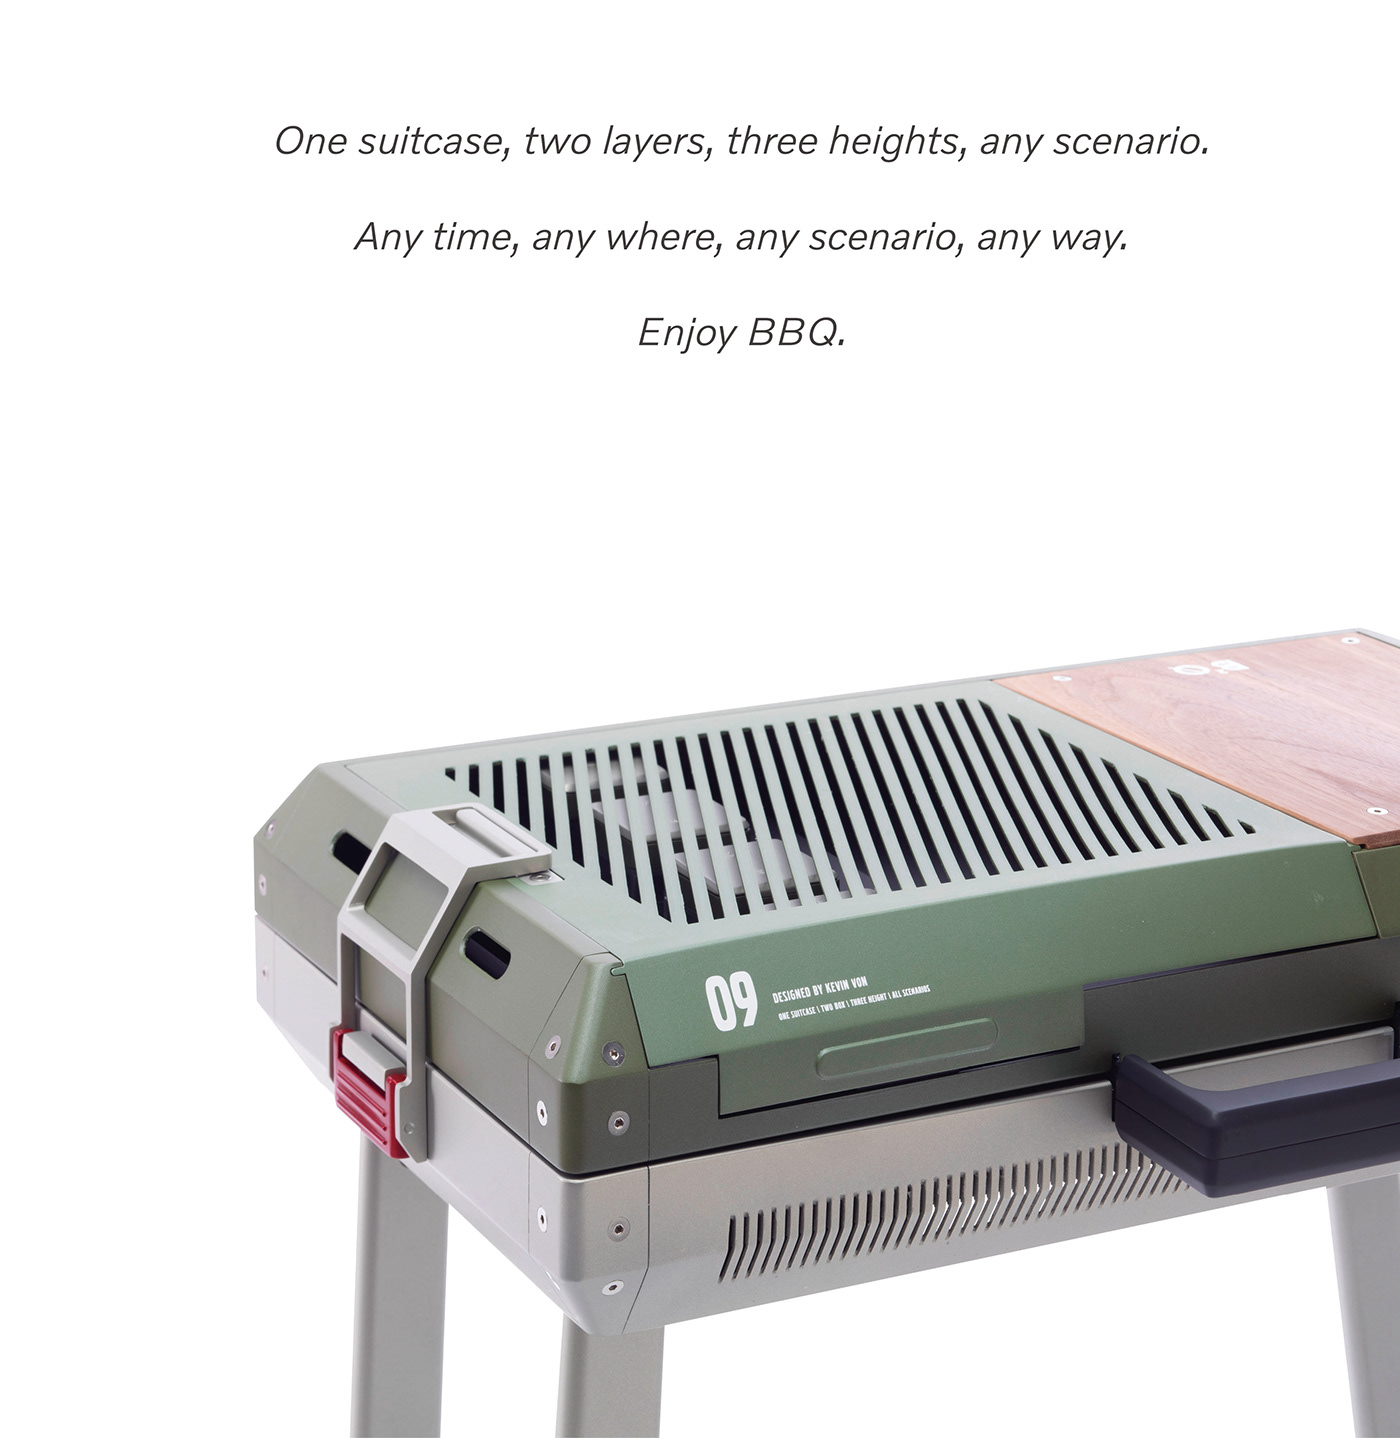 barbecue BBQ grill structure suitcase tableware tools Travel user experience ux